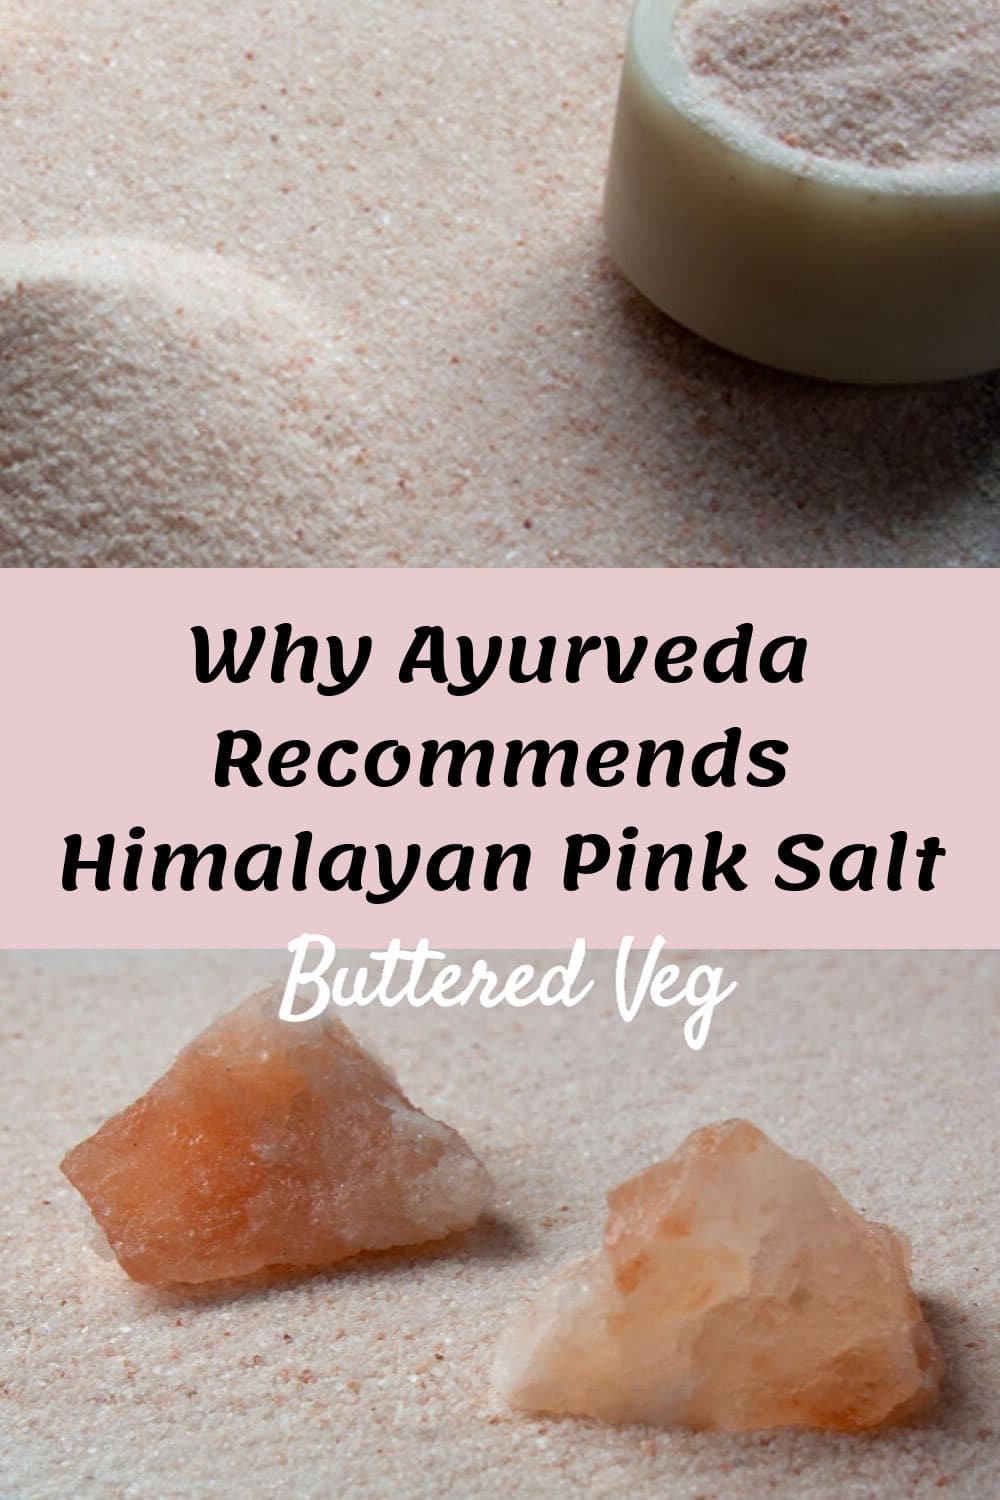 Why I Recommend Himalayan Pink Salt For Better Health (Hint: This Is Not A Trend)